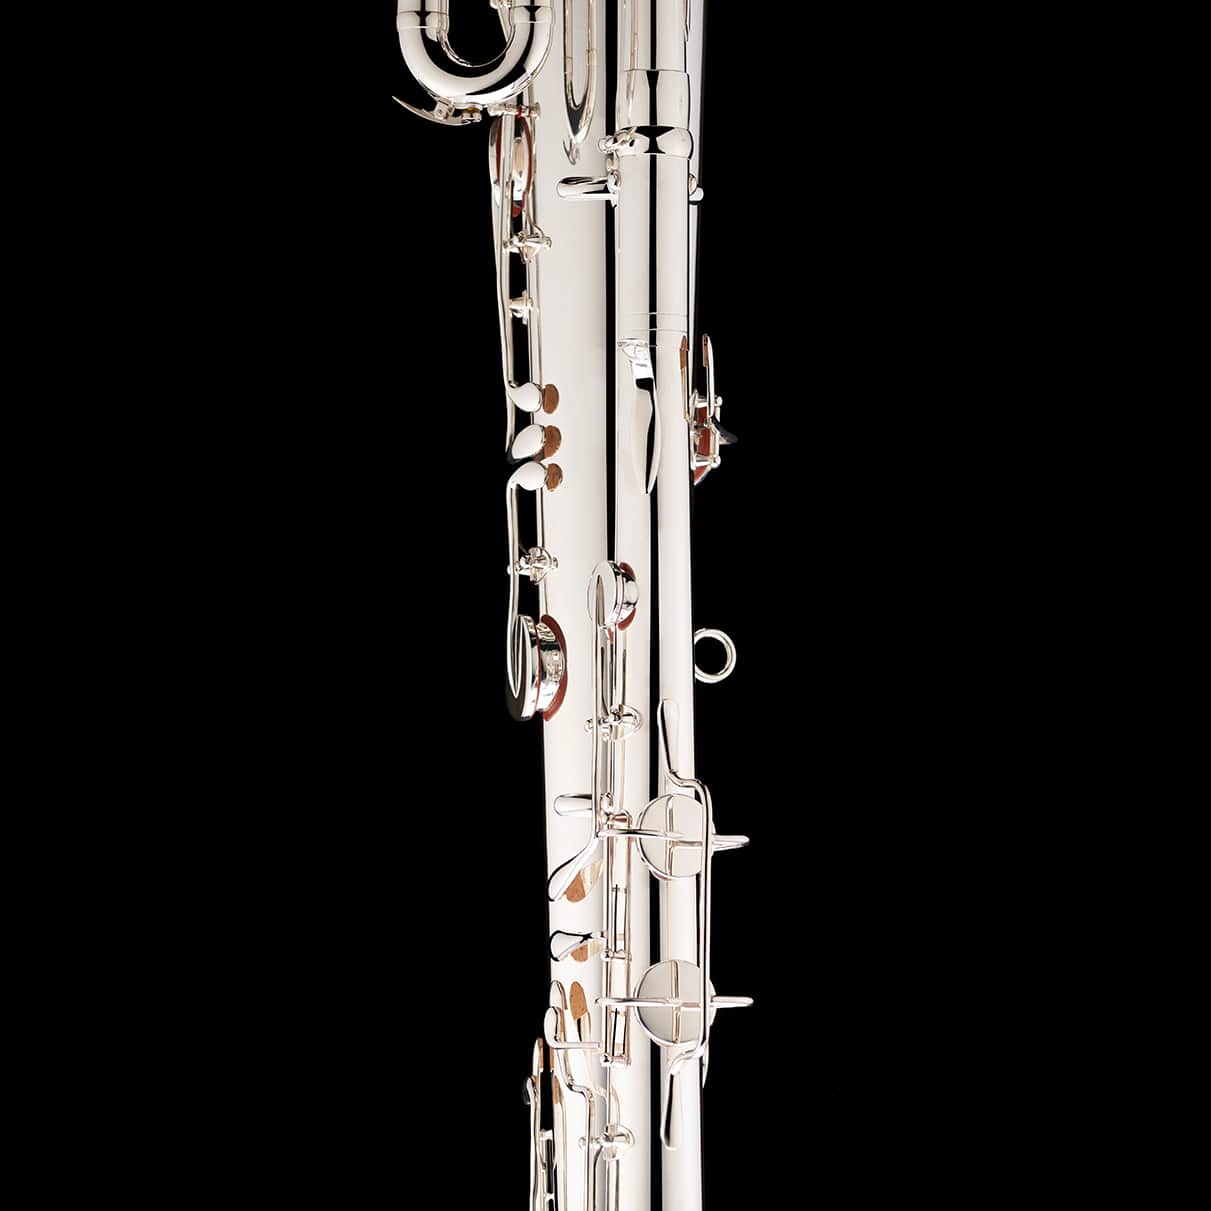 A close up image showing the detailed craftsmanship of a Bb Ophicleide in silver from Wessex Tubas